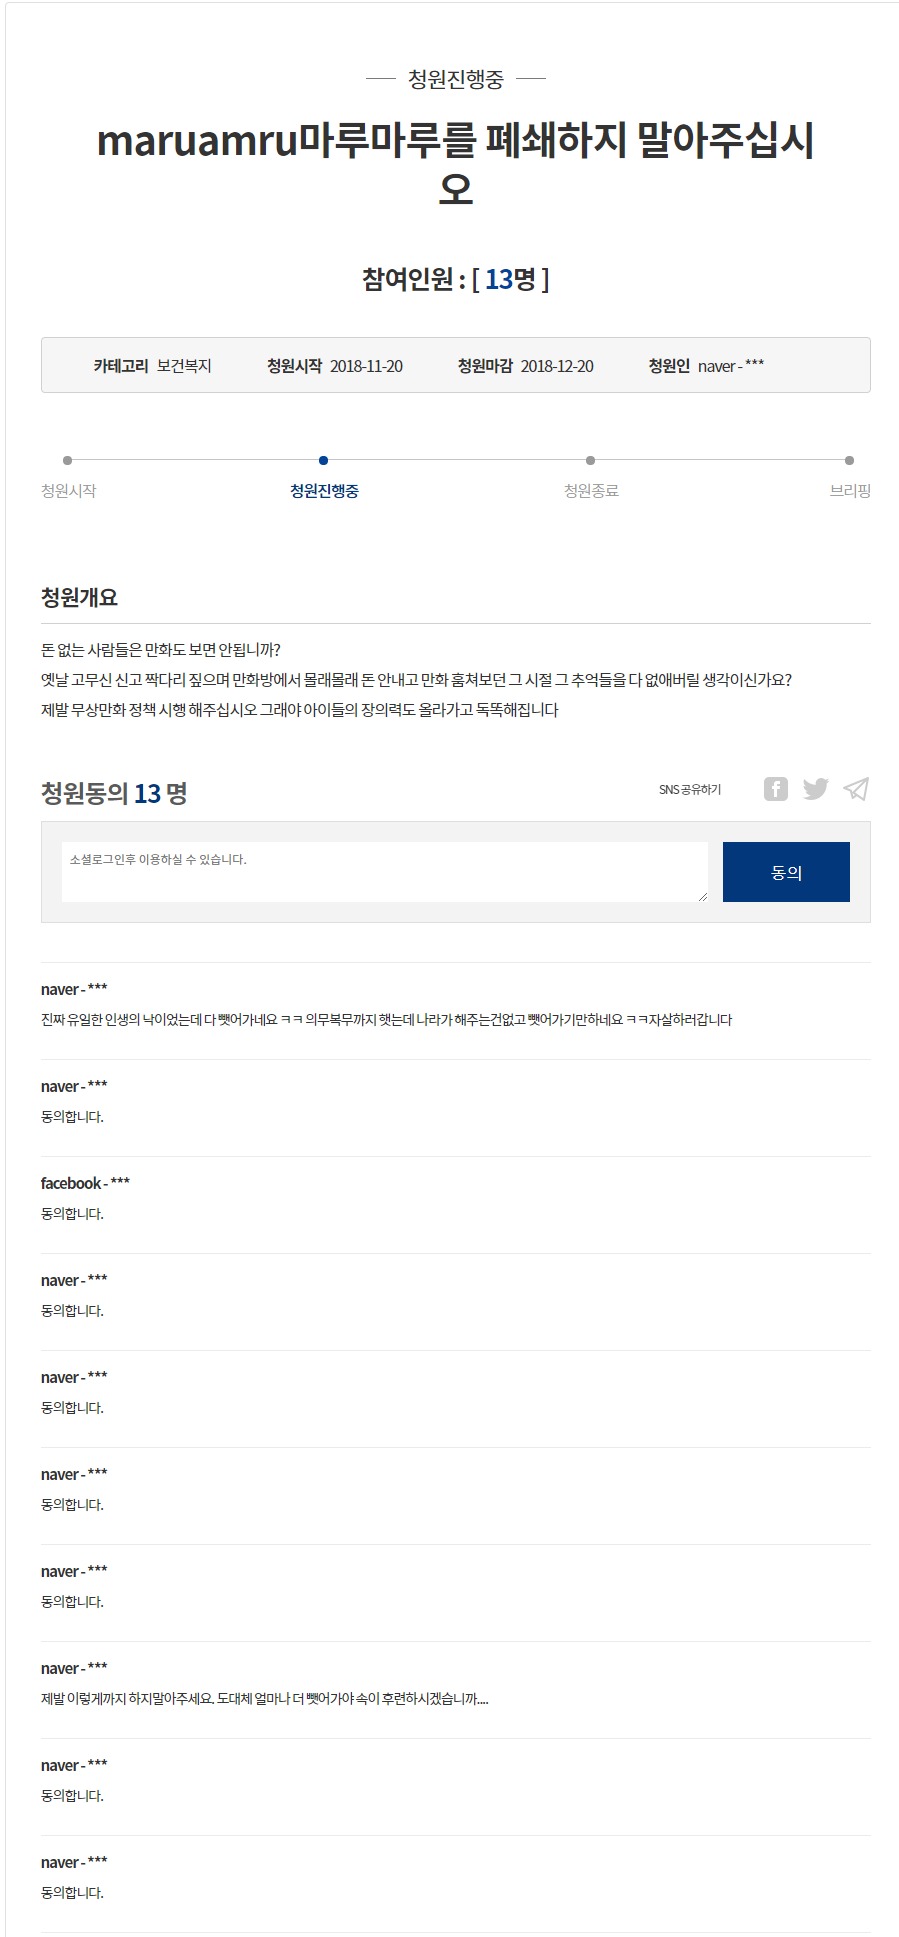 screencapture-www1-president-go-kr-petitions-447315-2018-11-20-02_26_19.png